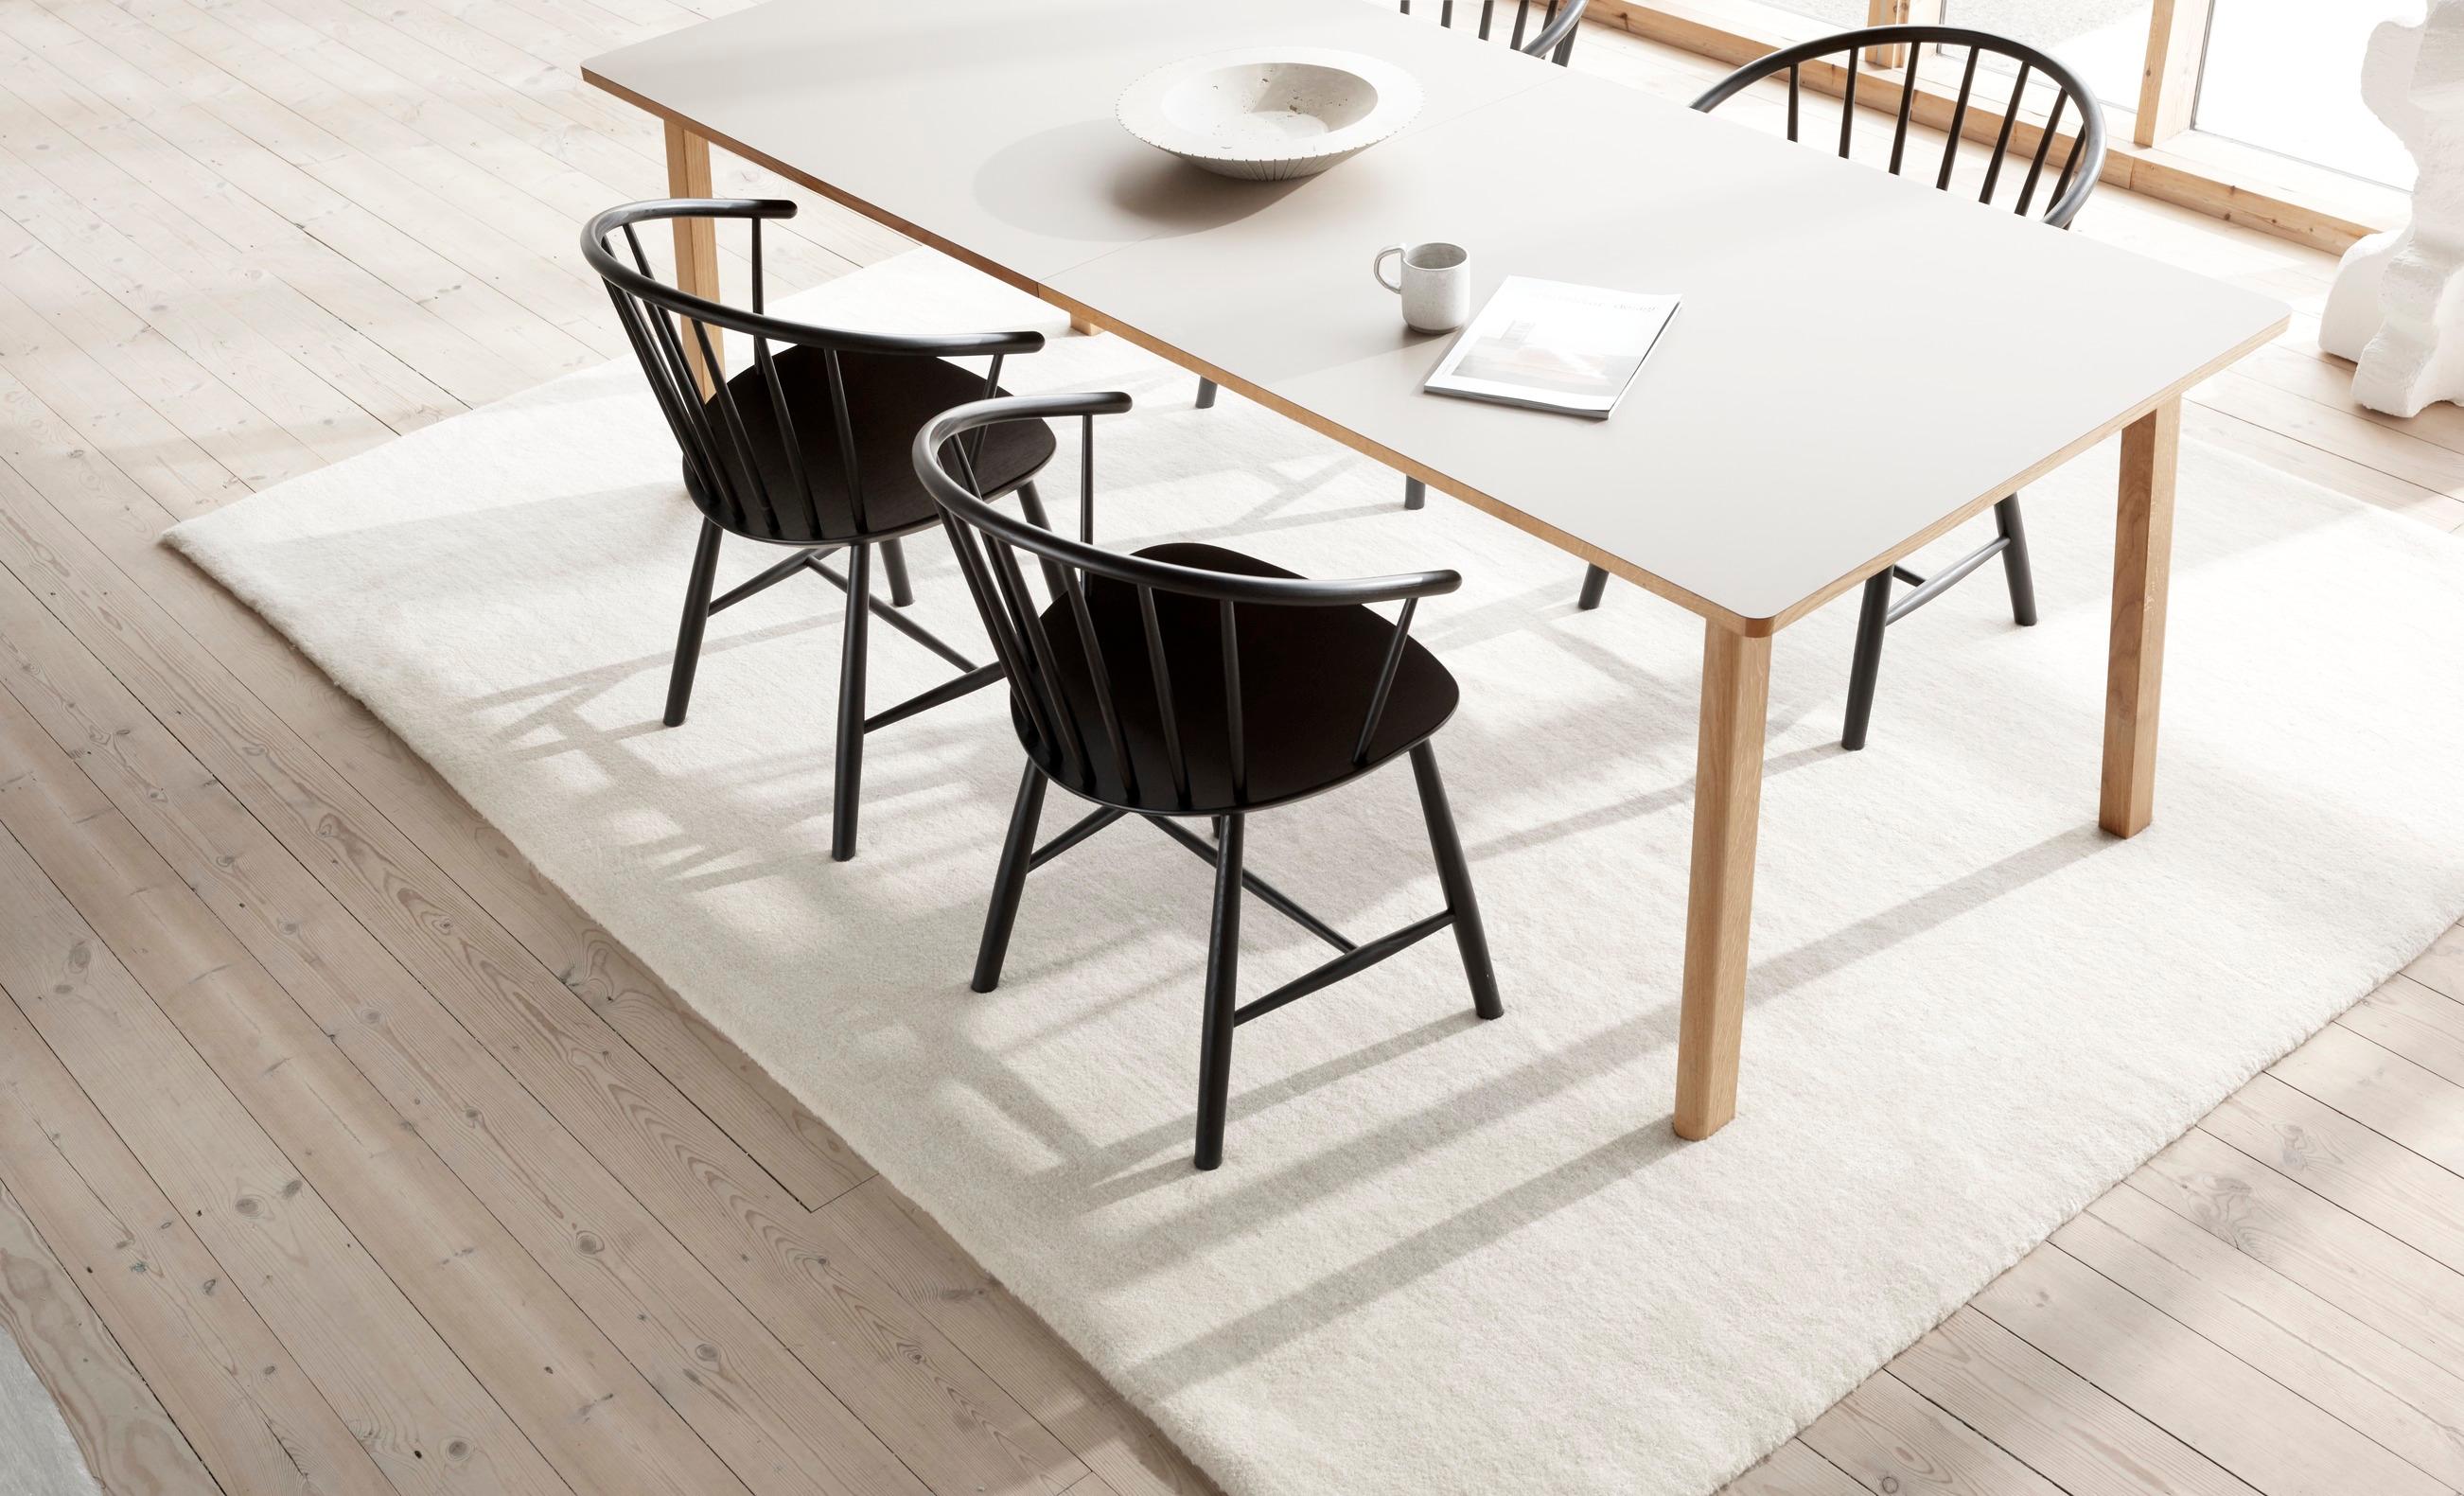 The embracing spindle back and gentle, sloping armrests make the J64 chair a classic, yet visually graphic design. 
The curve of the seat and back add ergonomic comfort and allows for many seating postures. The J64 is ideal as a dining chair or as a